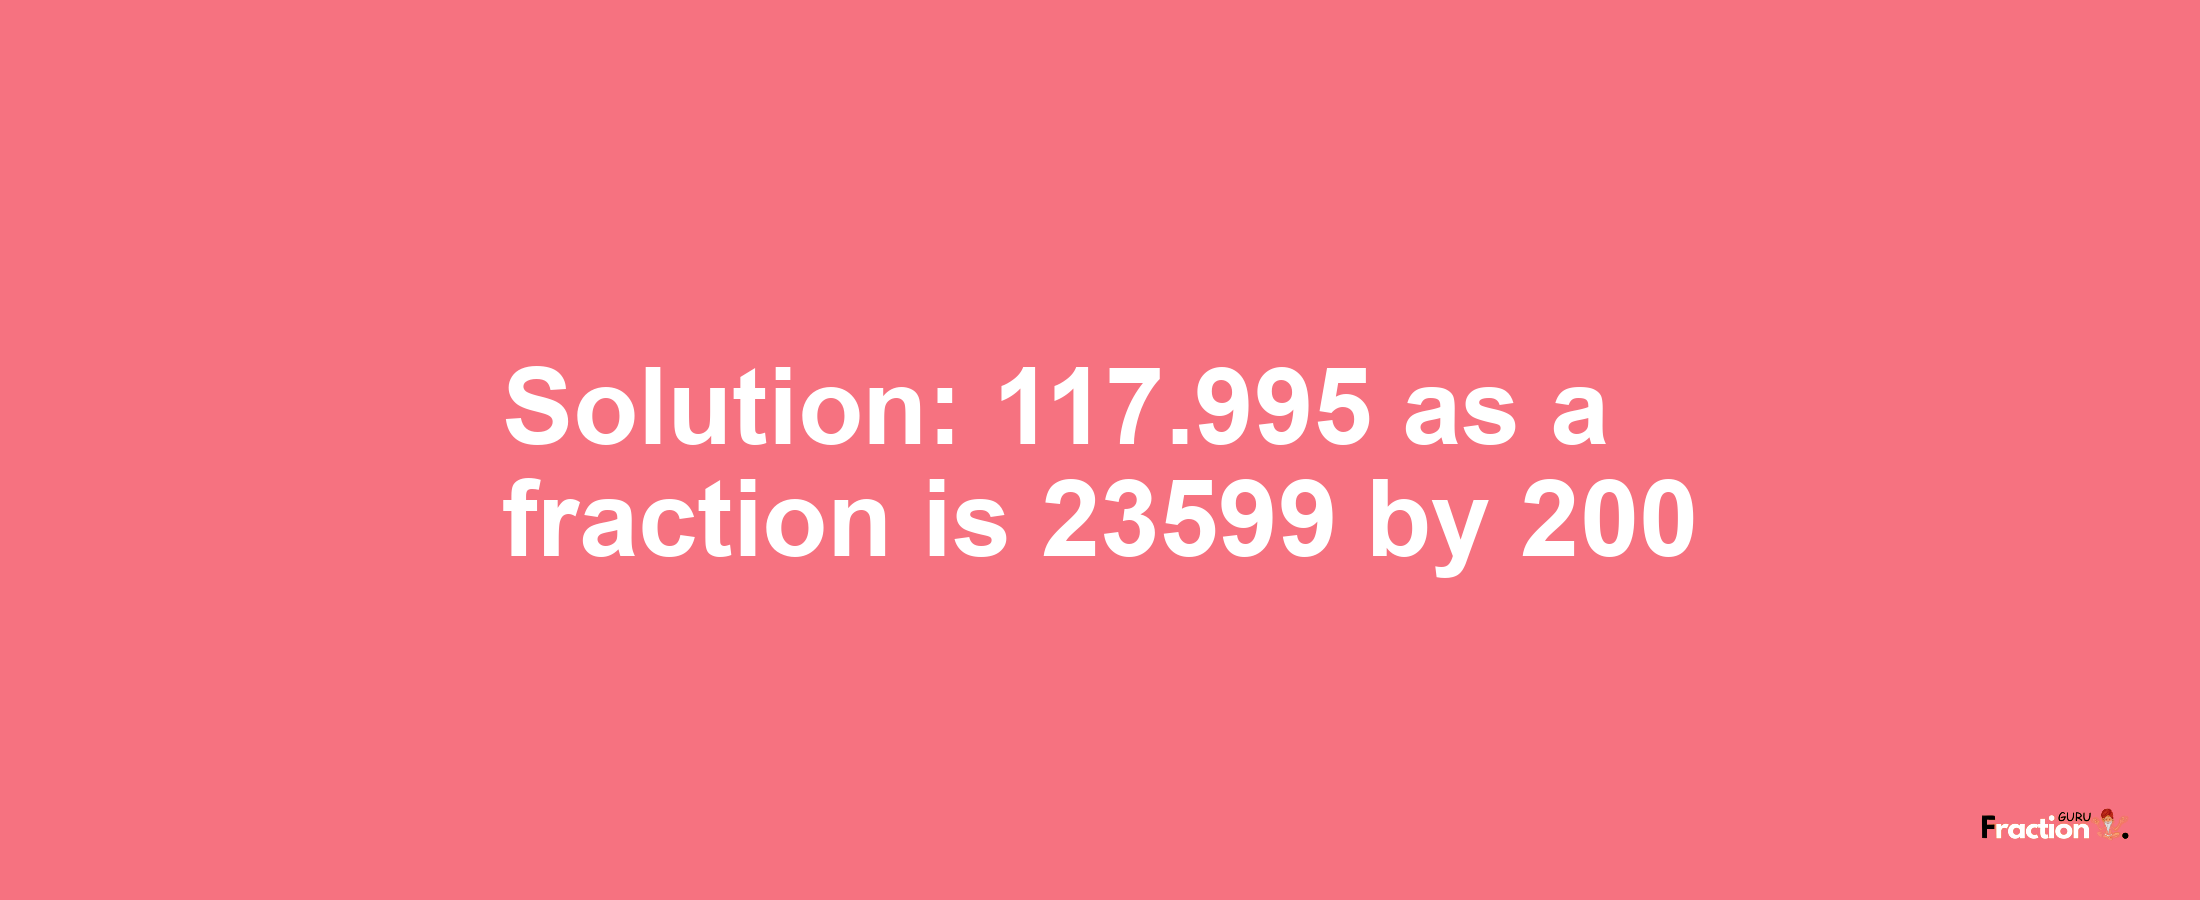 Solution:117.995 as a fraction is 23599/200